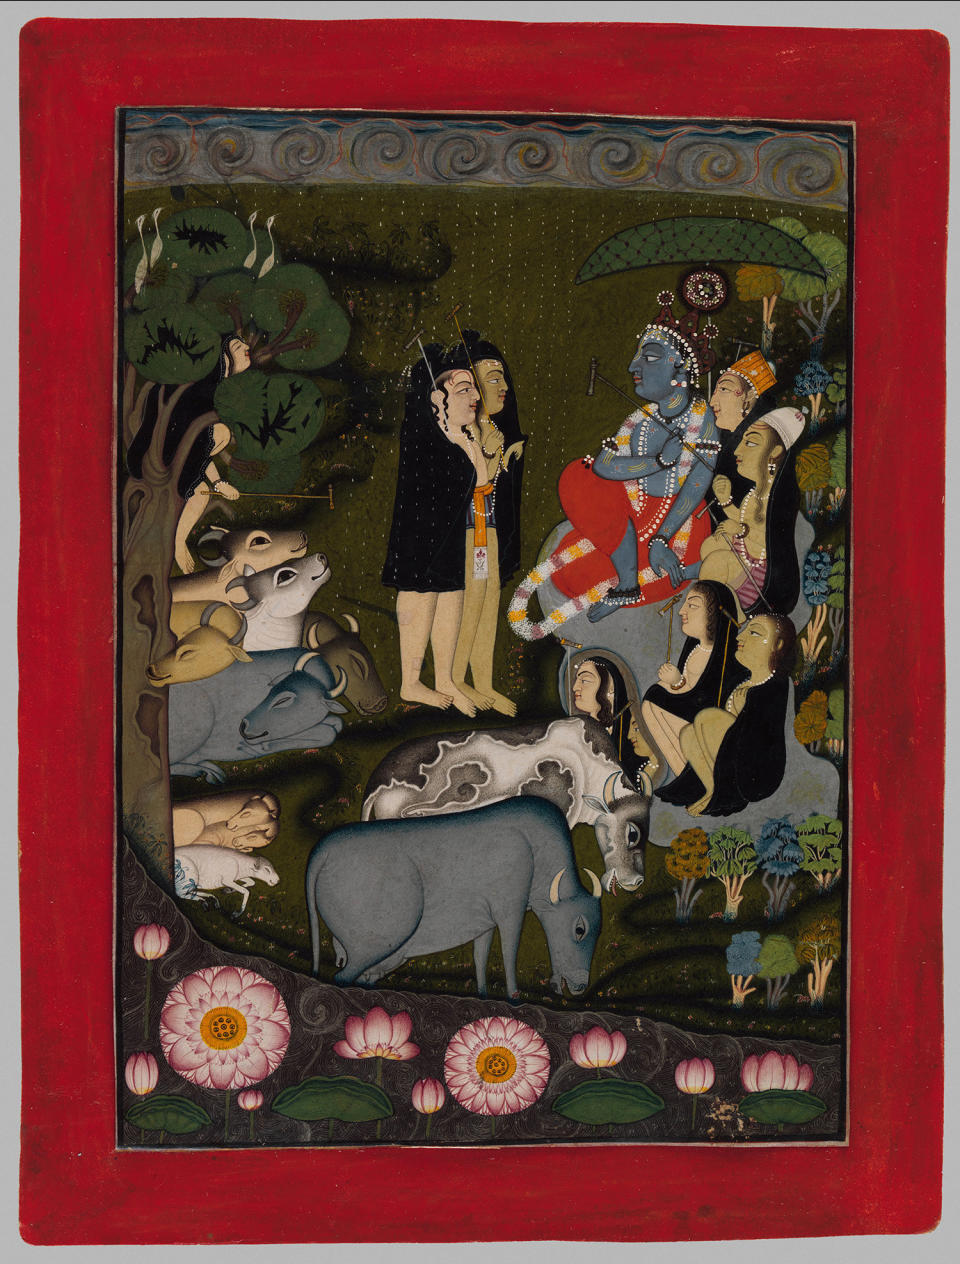 "Krishna and the Gopas (Cowherders) Huddle in the&nbsp;Rain."&nbsp;Attributed to the artist known as the Master of the&nbsp;Swirling Skies (active second quarter of 18th century)&nbsp;Punjab Hills, kingdom of Jammu, ca. 1725&ndash;50.&nbsp;Opaque watercolor and silver (now tarnished) on&nbsp;paper; modern border; painting 8 3/8 x 5 7/8 in.&nbsp;Promised Gift of the Kronos Collections, 2015&nbsp;